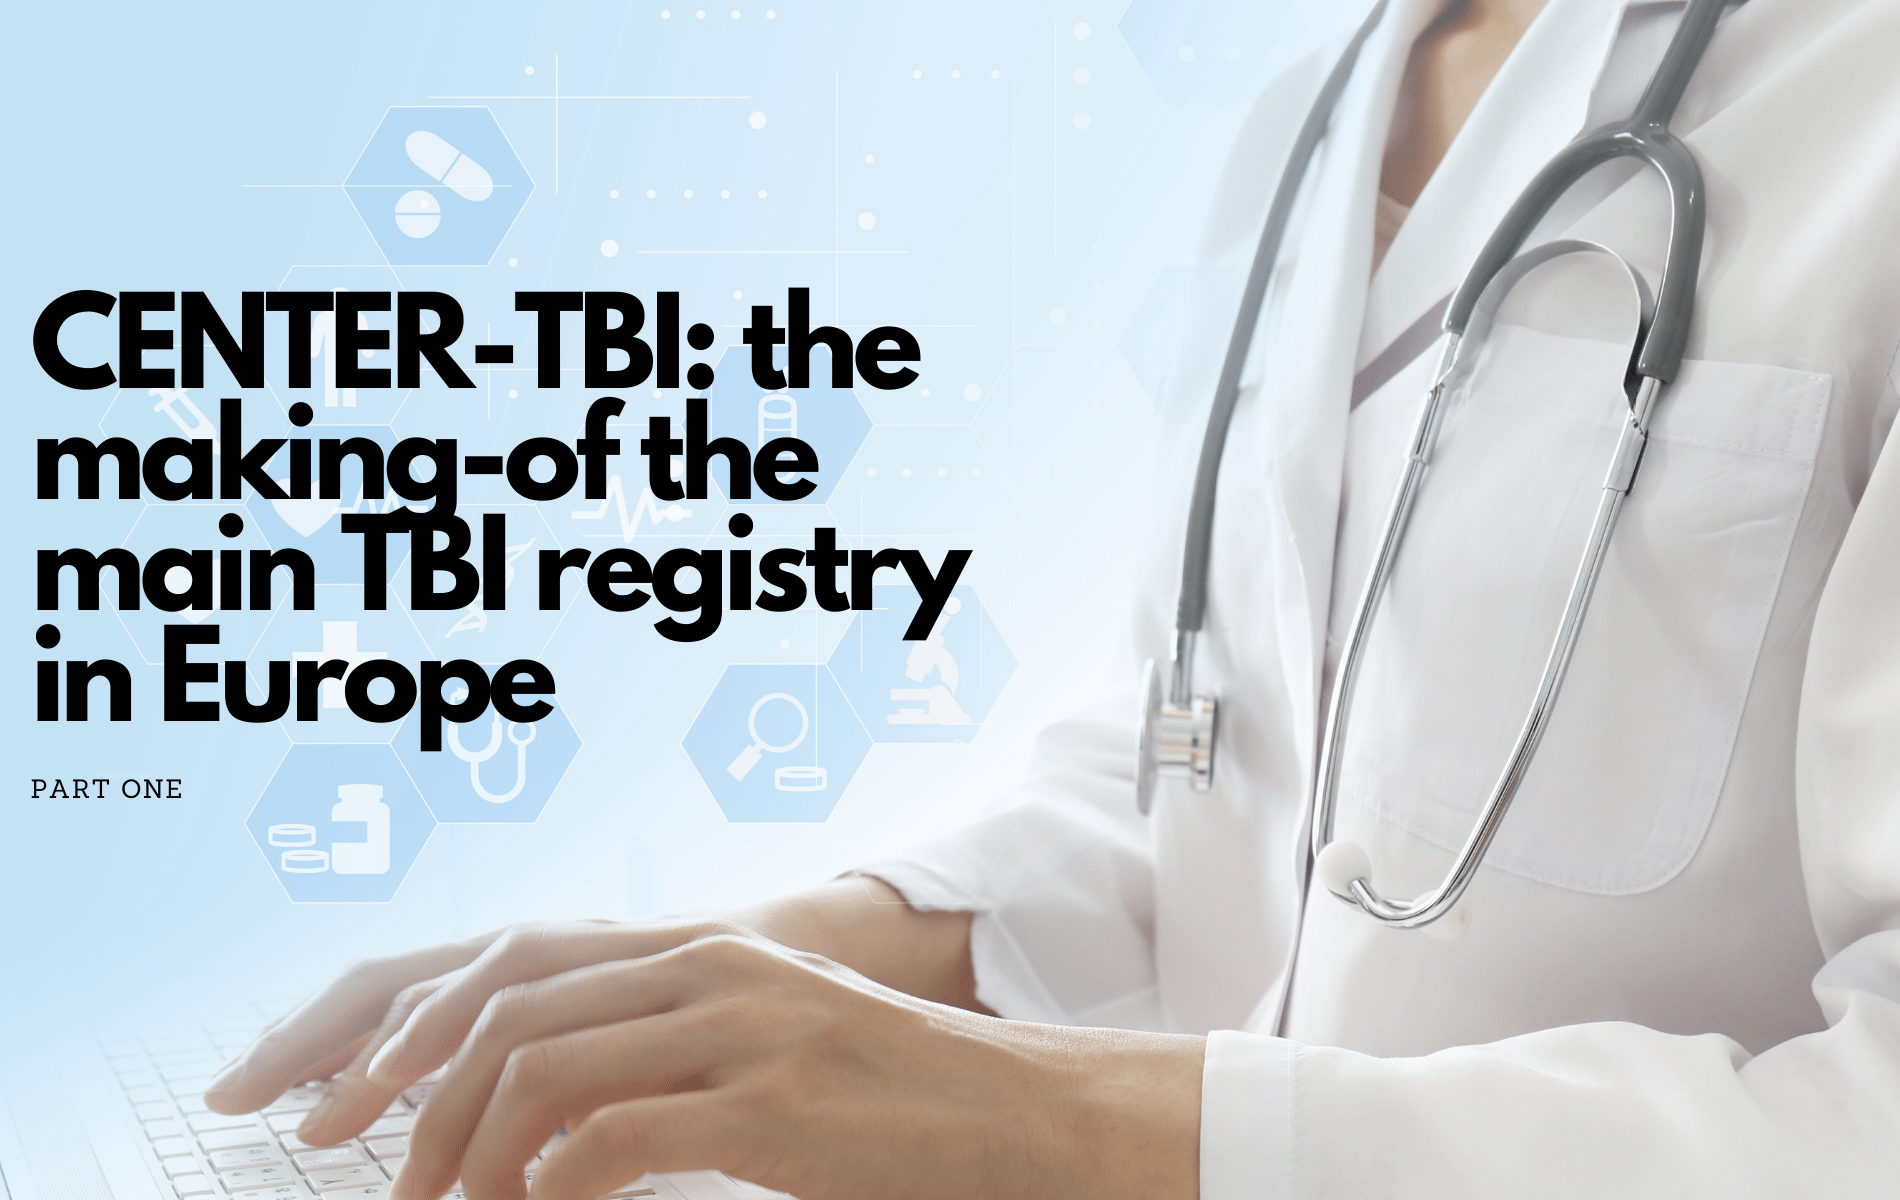 CENTER-TBI: the making-of the main TBI registry in Europe (Part I)